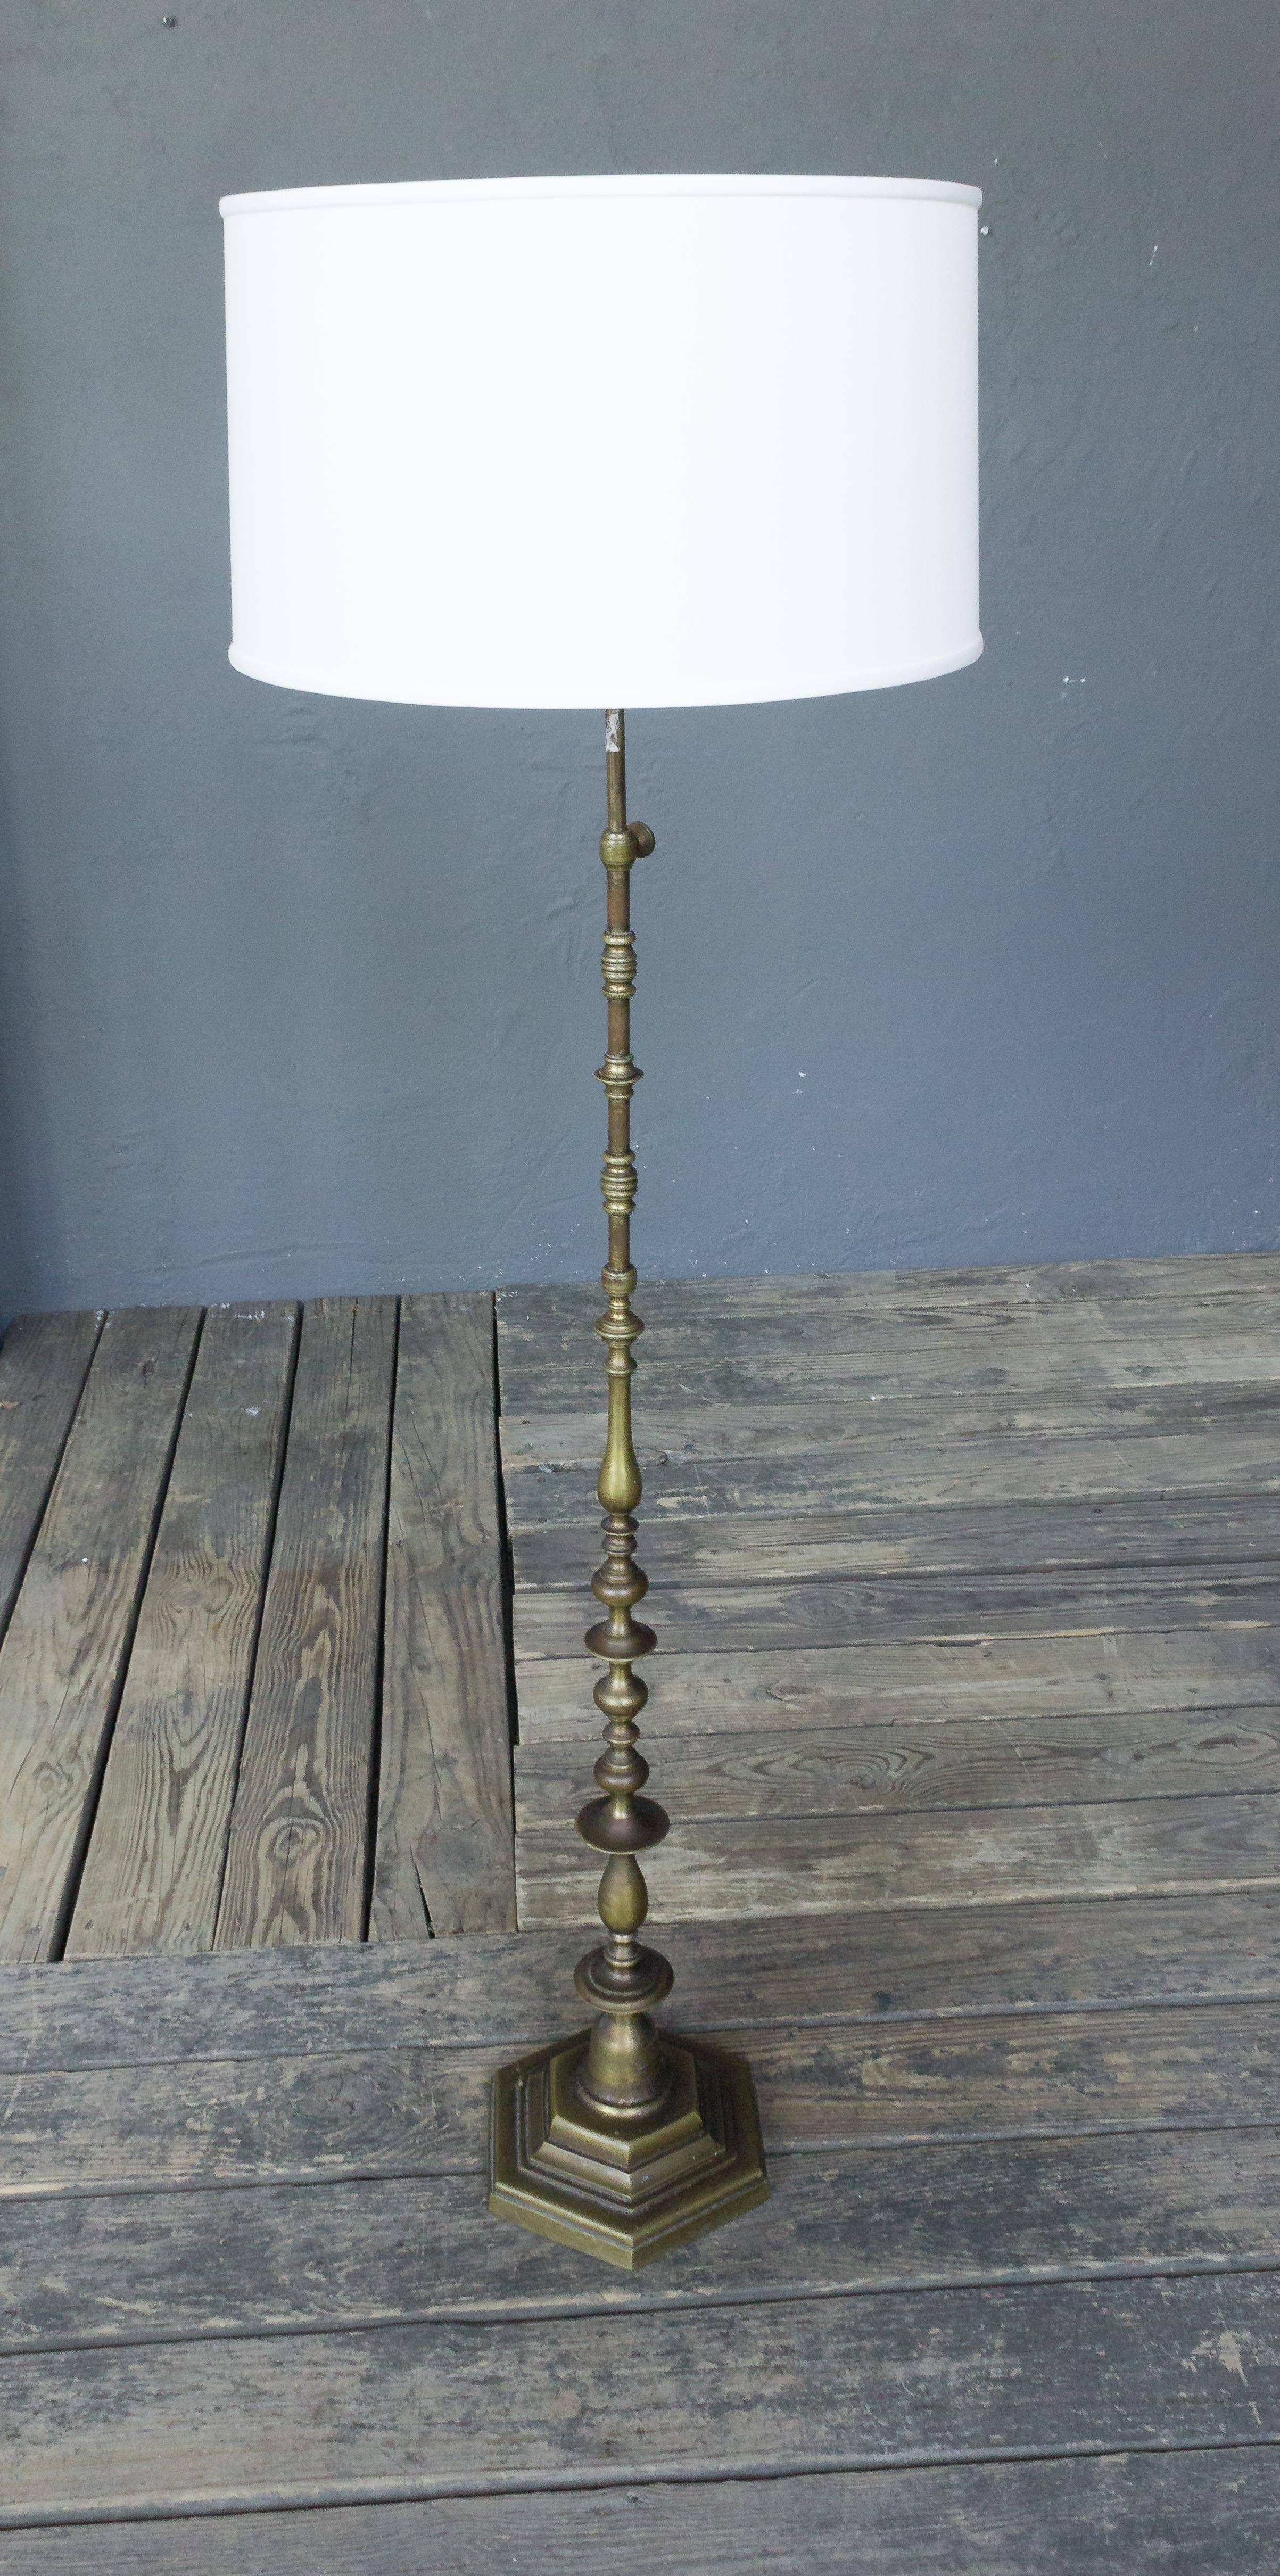 Patinated bronze floor lamp on hexagonal base with adjustable height.

Price includes polishing or plating and new wiring. Please allow 2 to 3 weeks for completion. Not sold with shade (photographed with 10 inch H x 18 inch Diameter shade). 